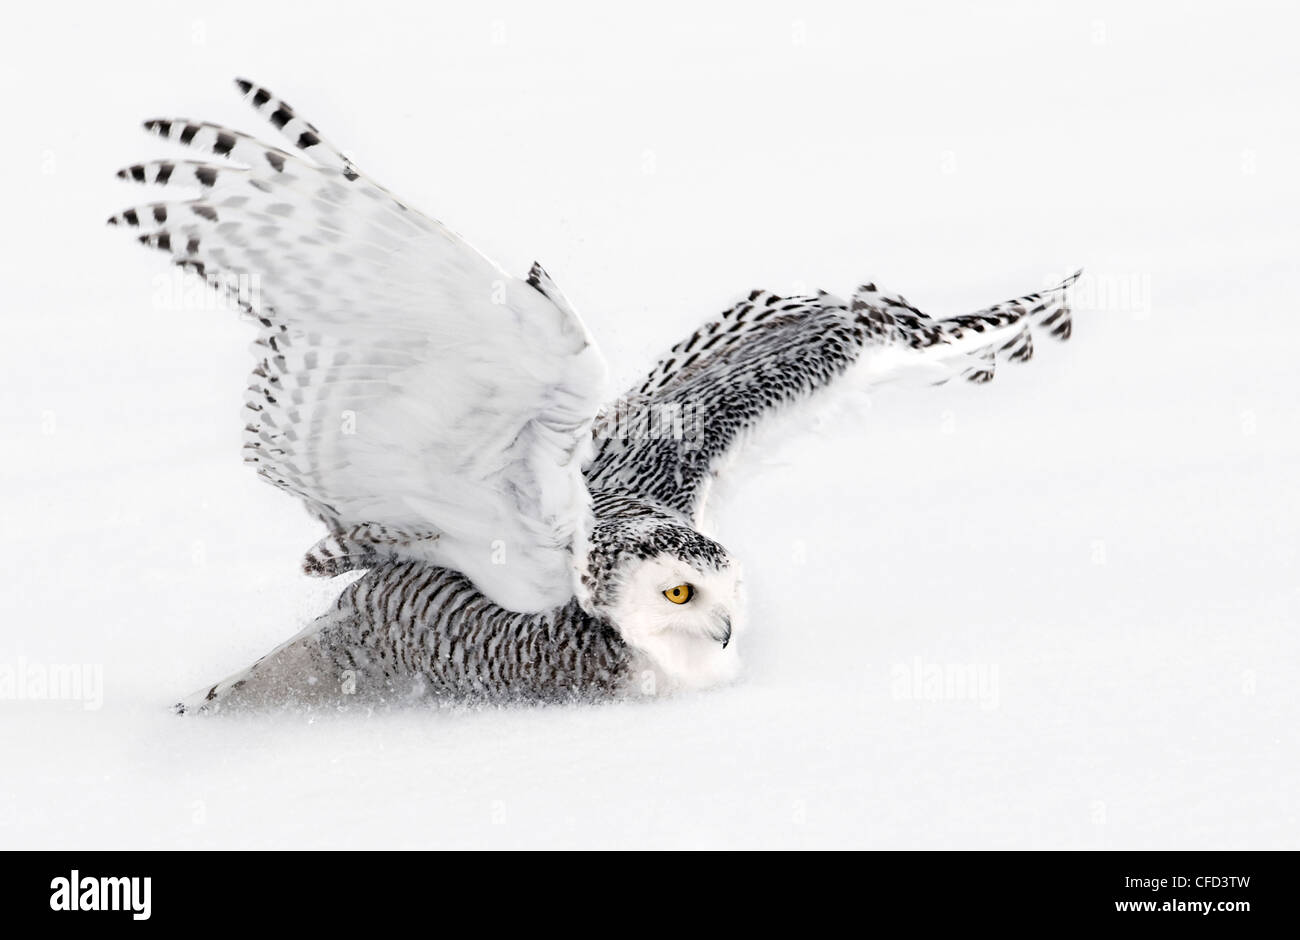 Snowy Owl landing, Ottawa, Canada Banque D'Images